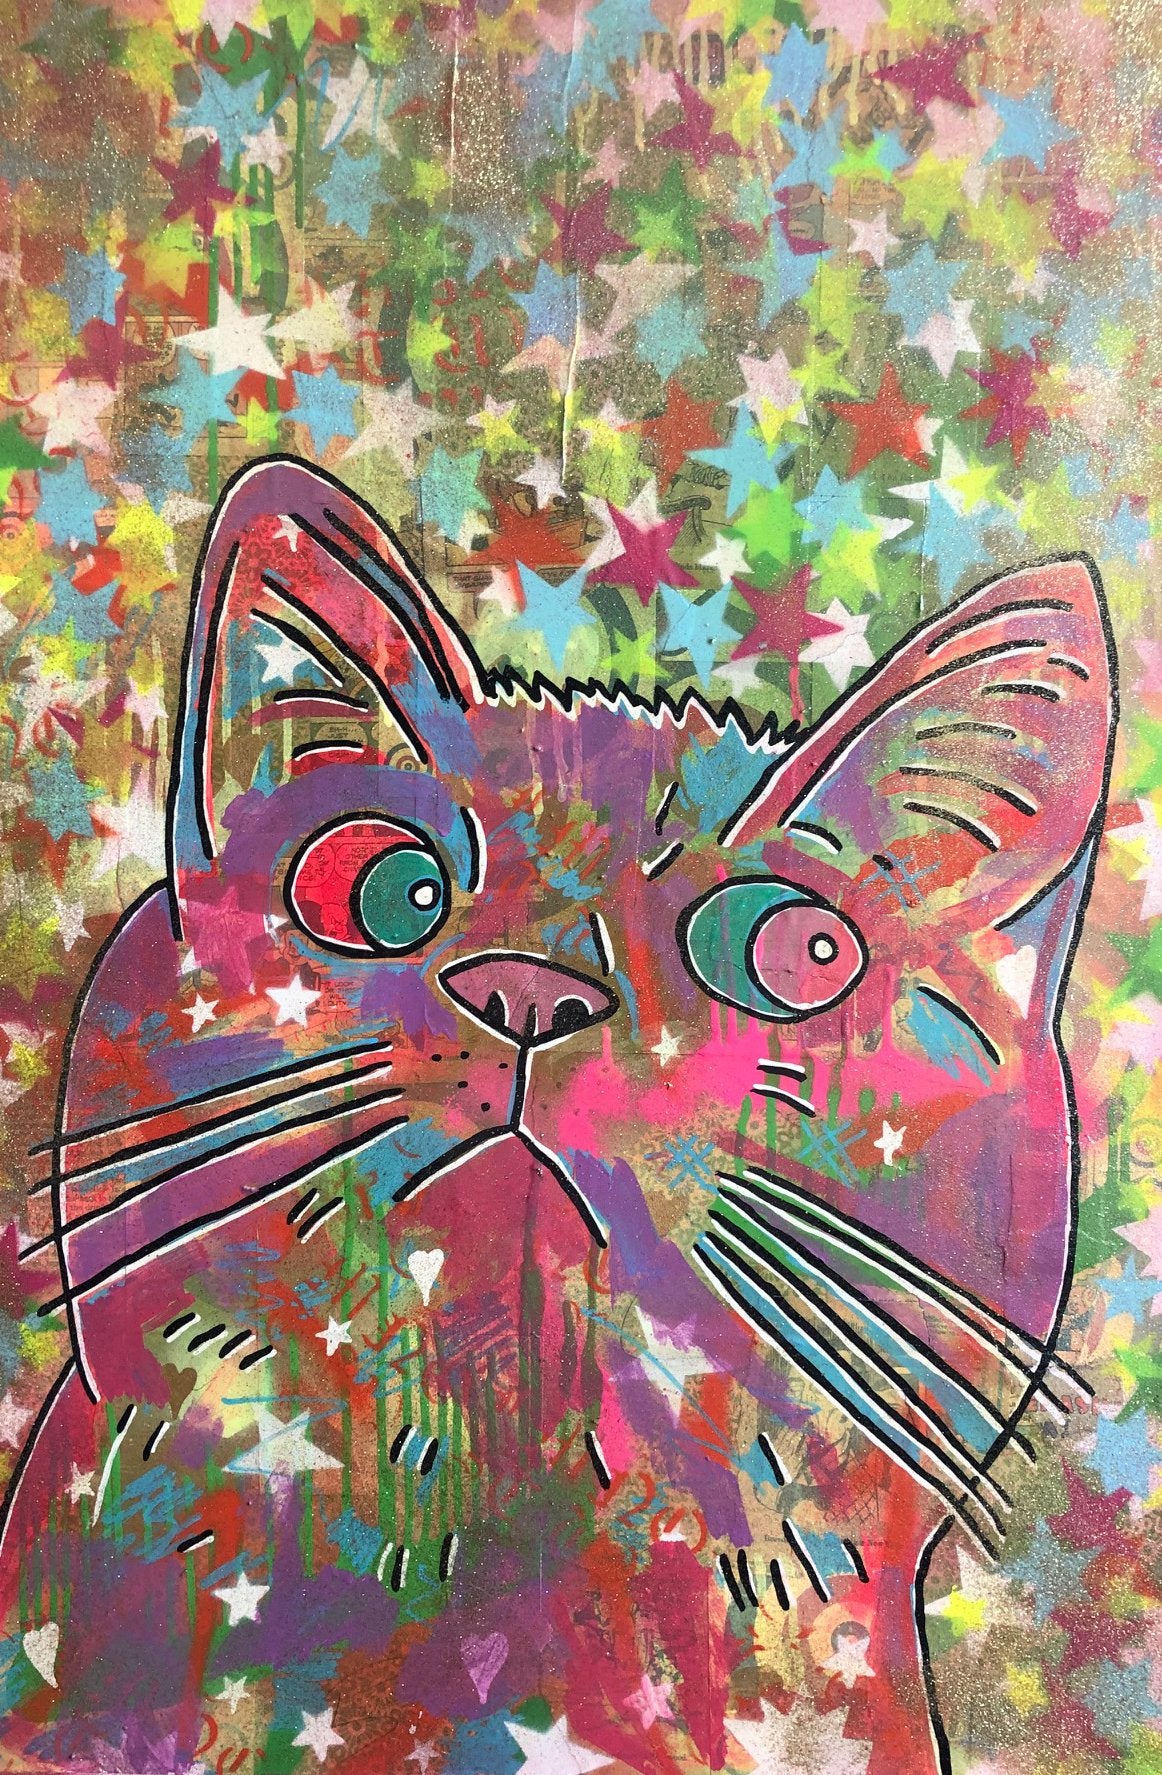 Cosmic moggy pink by Barrie J Davies 2018, Mixed media on canvas, 90cm x 90cm, Unframed. Barrie J Davies is an Artist - Pop Art and Street art inspired Artist based in Brighton England UK - Pop Art Paintings, Street Art Prints & Editions available.